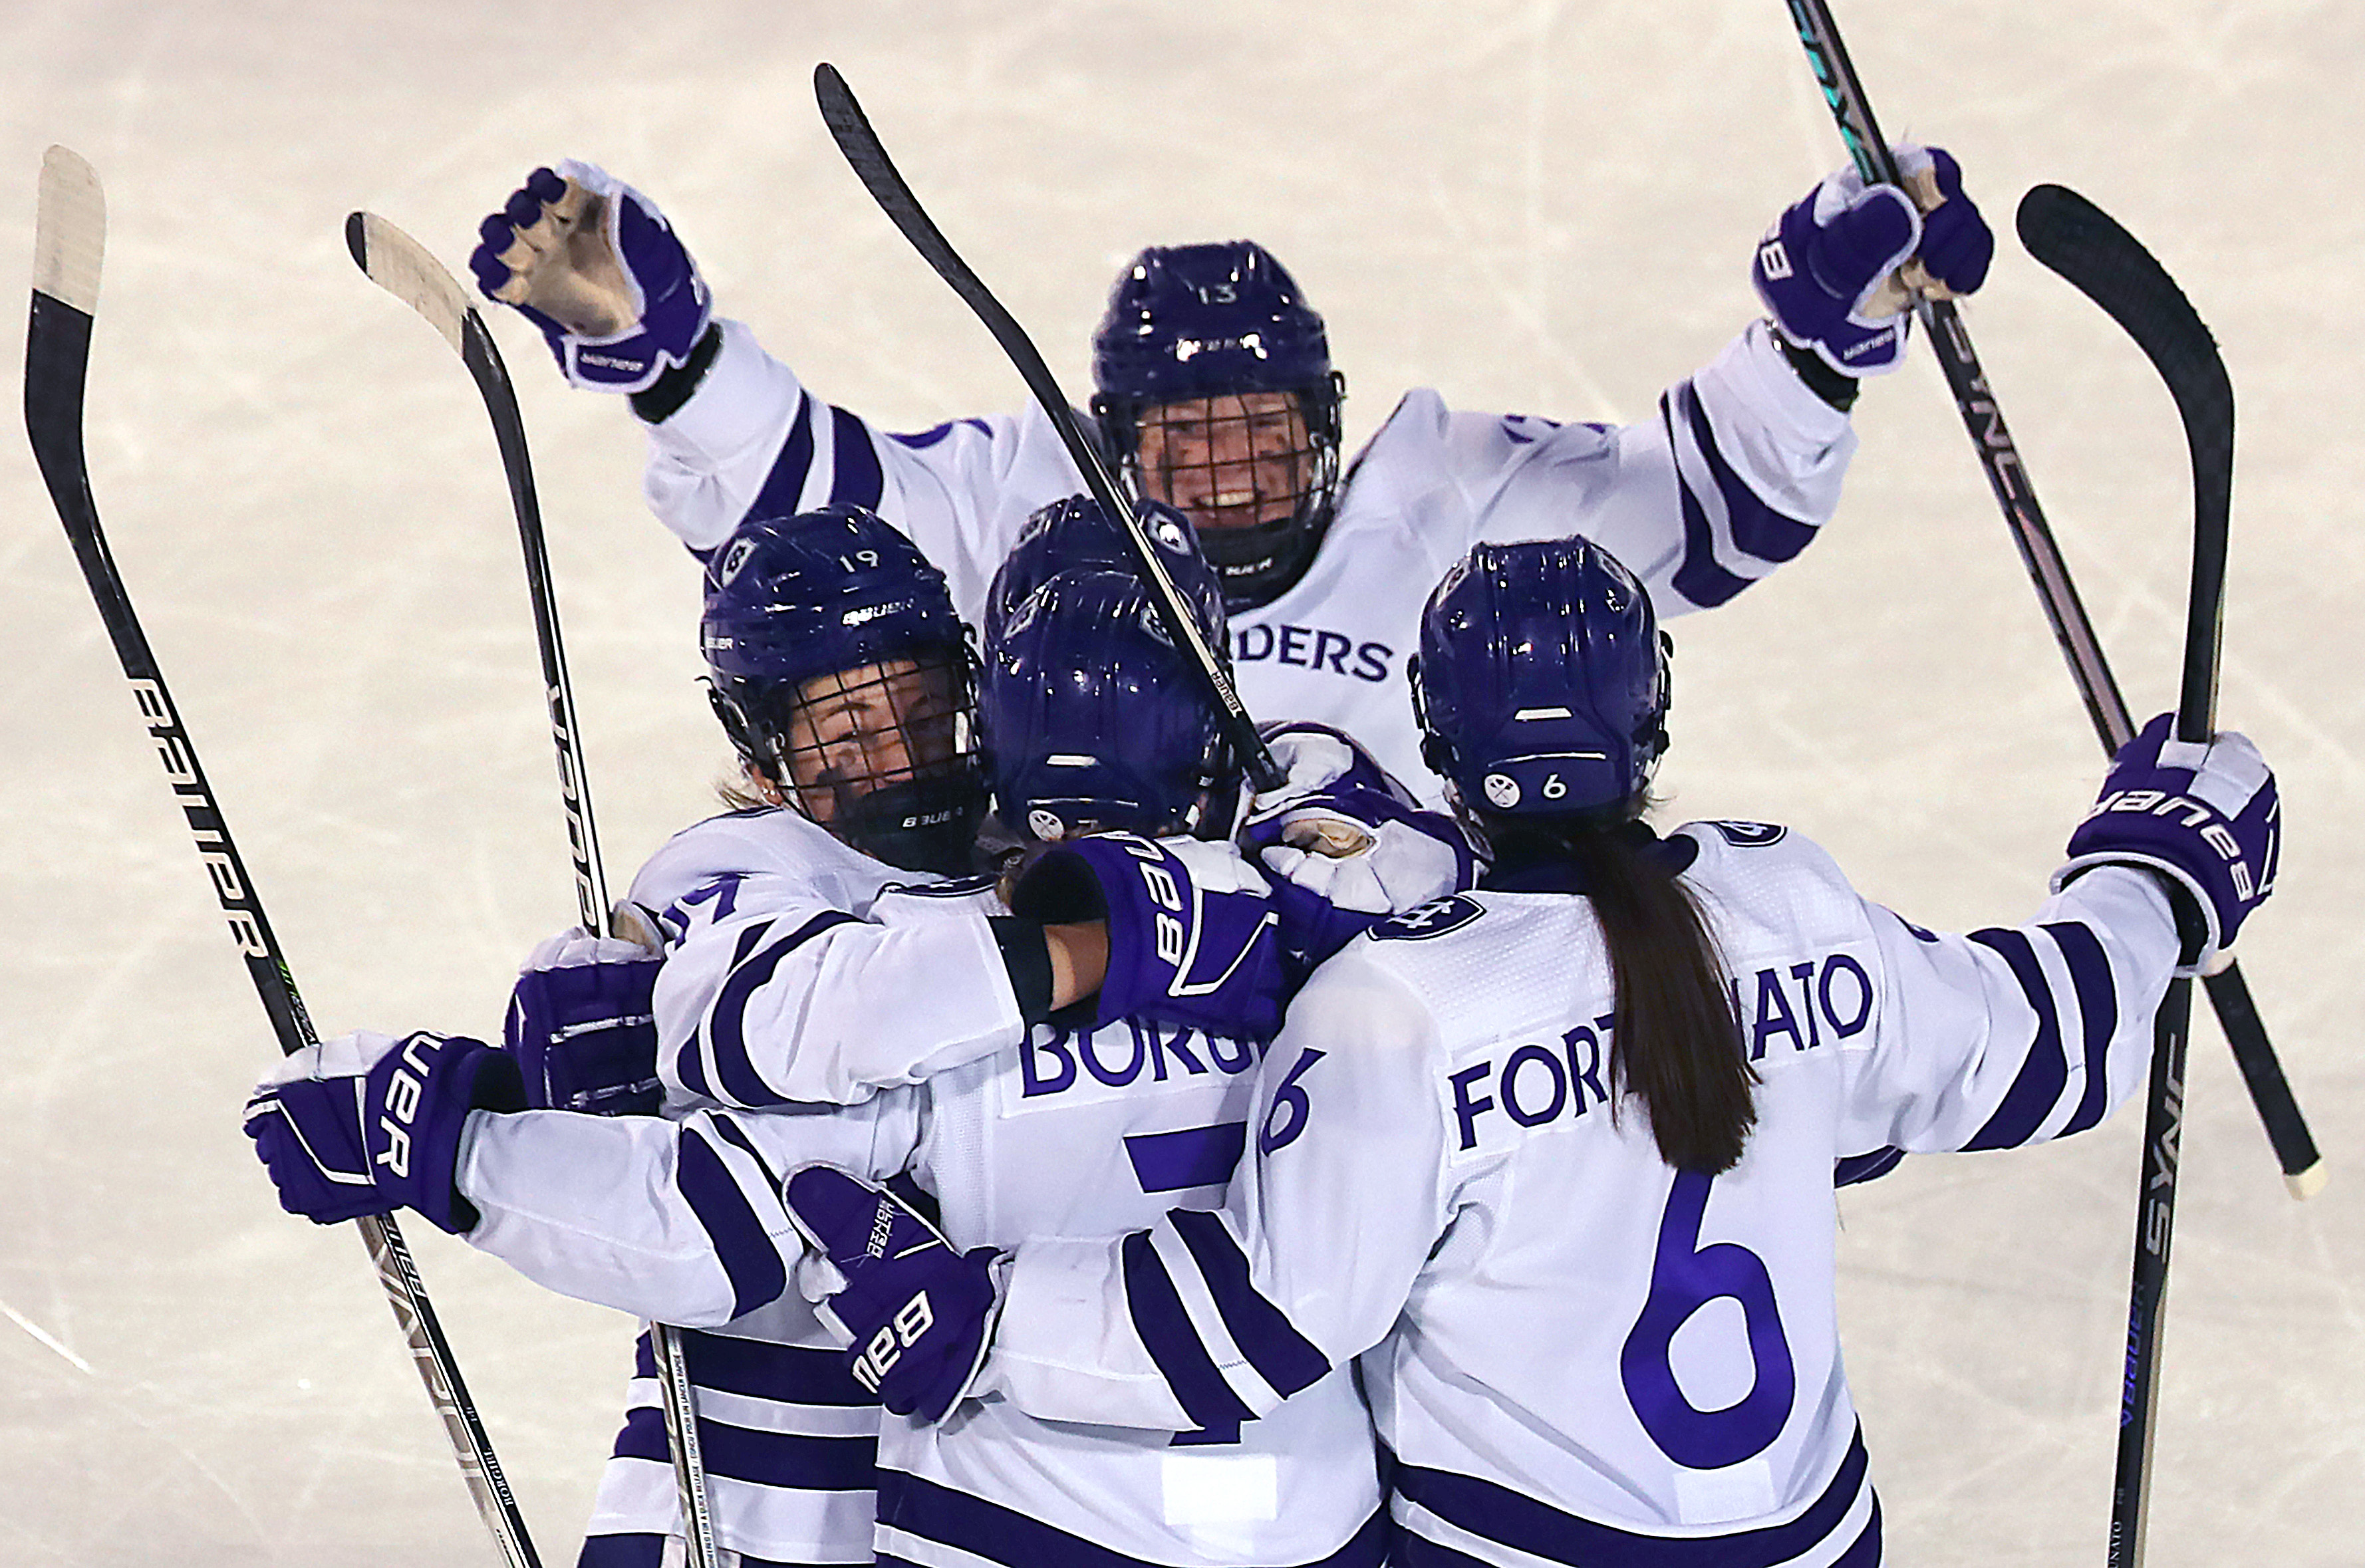 GALLERY: Terriers fall short to Holy Cross at Frozen Fenway – The